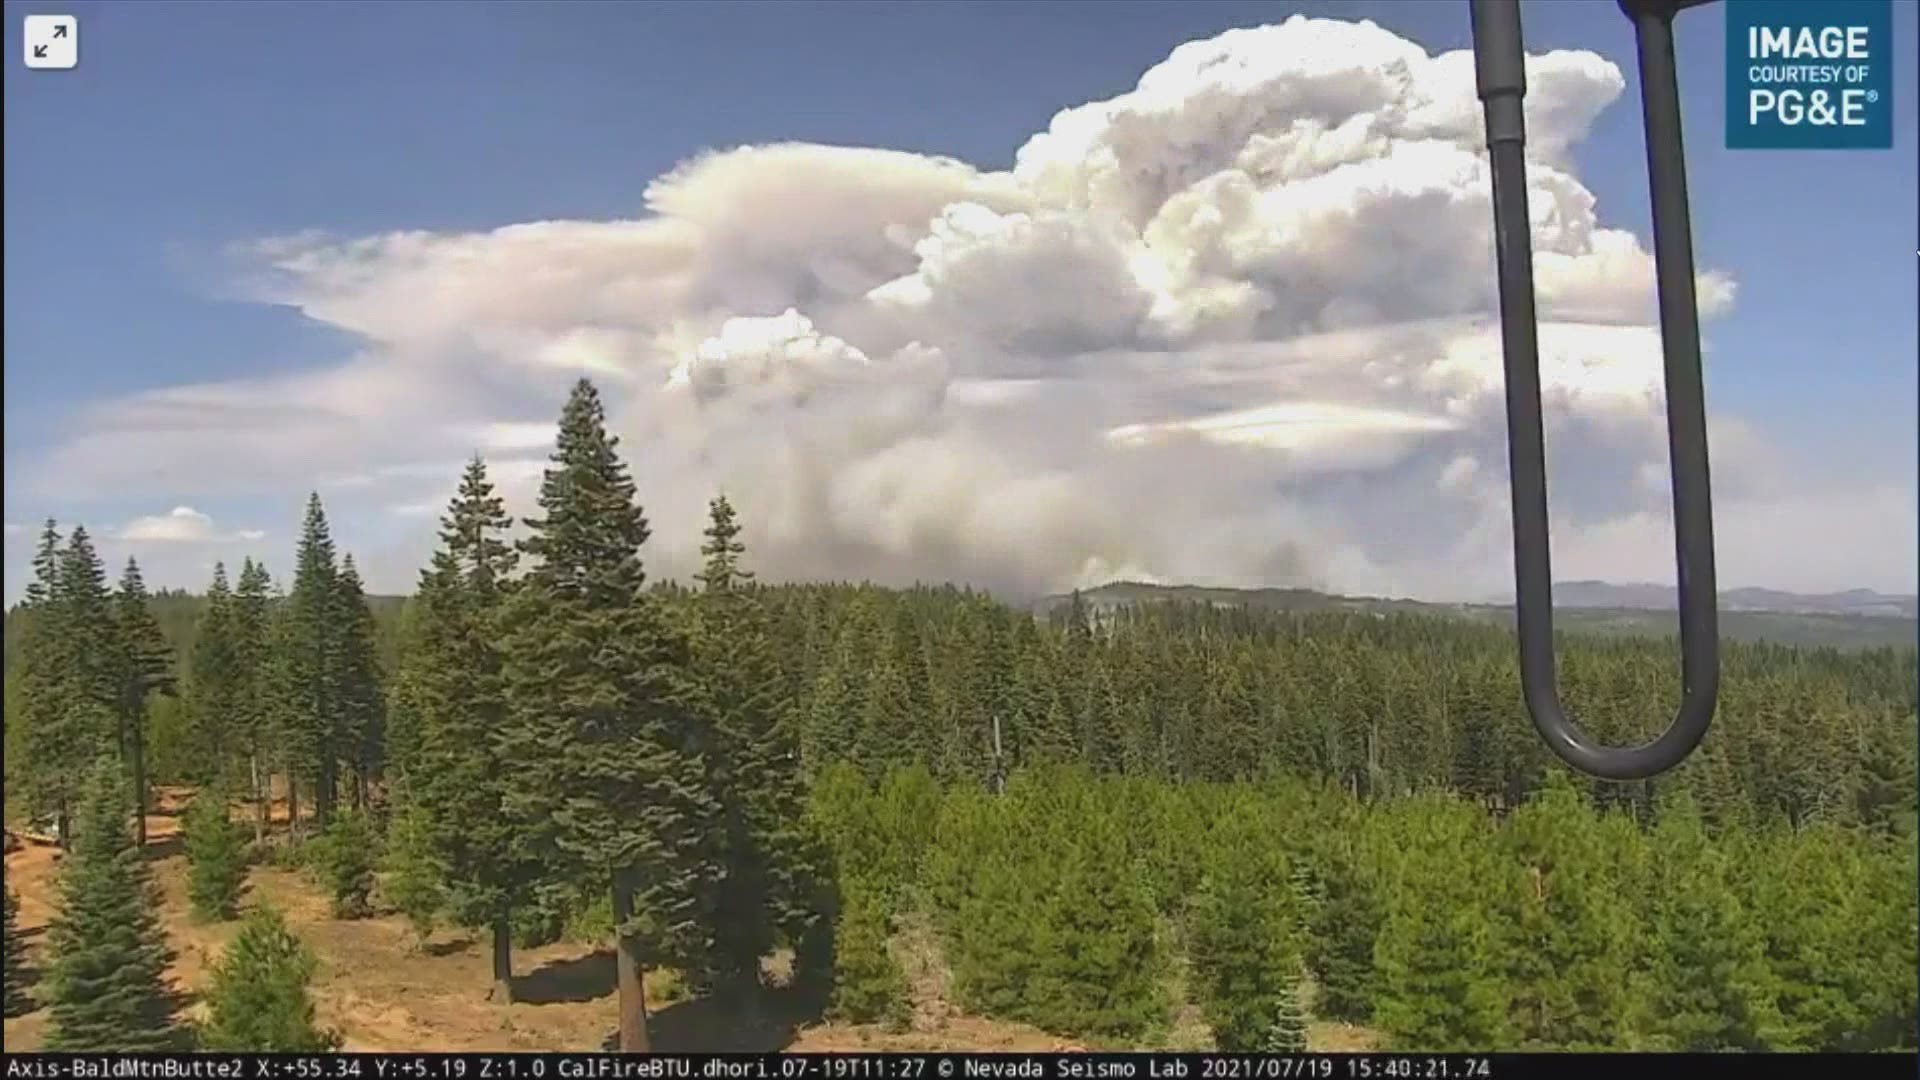 Often associated with volcanoes, scientists are now noticing clusters of PyroCbs in wildfires. Here's what to know about these smoke-filled thunderclouds.